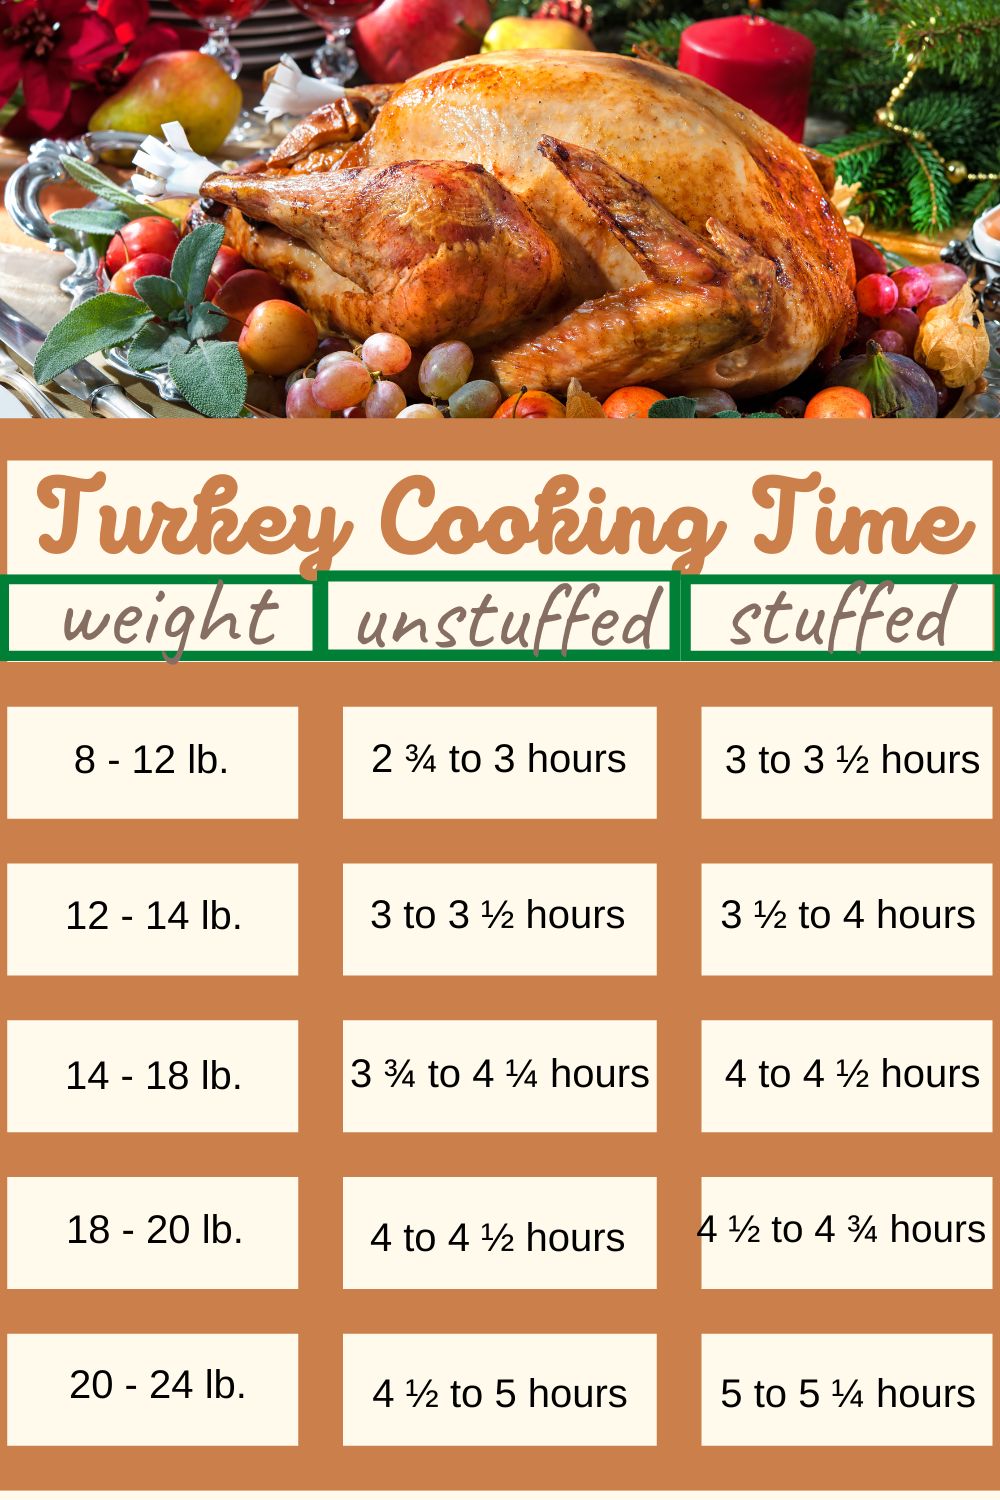 A graph of turkey cooking time by weight.